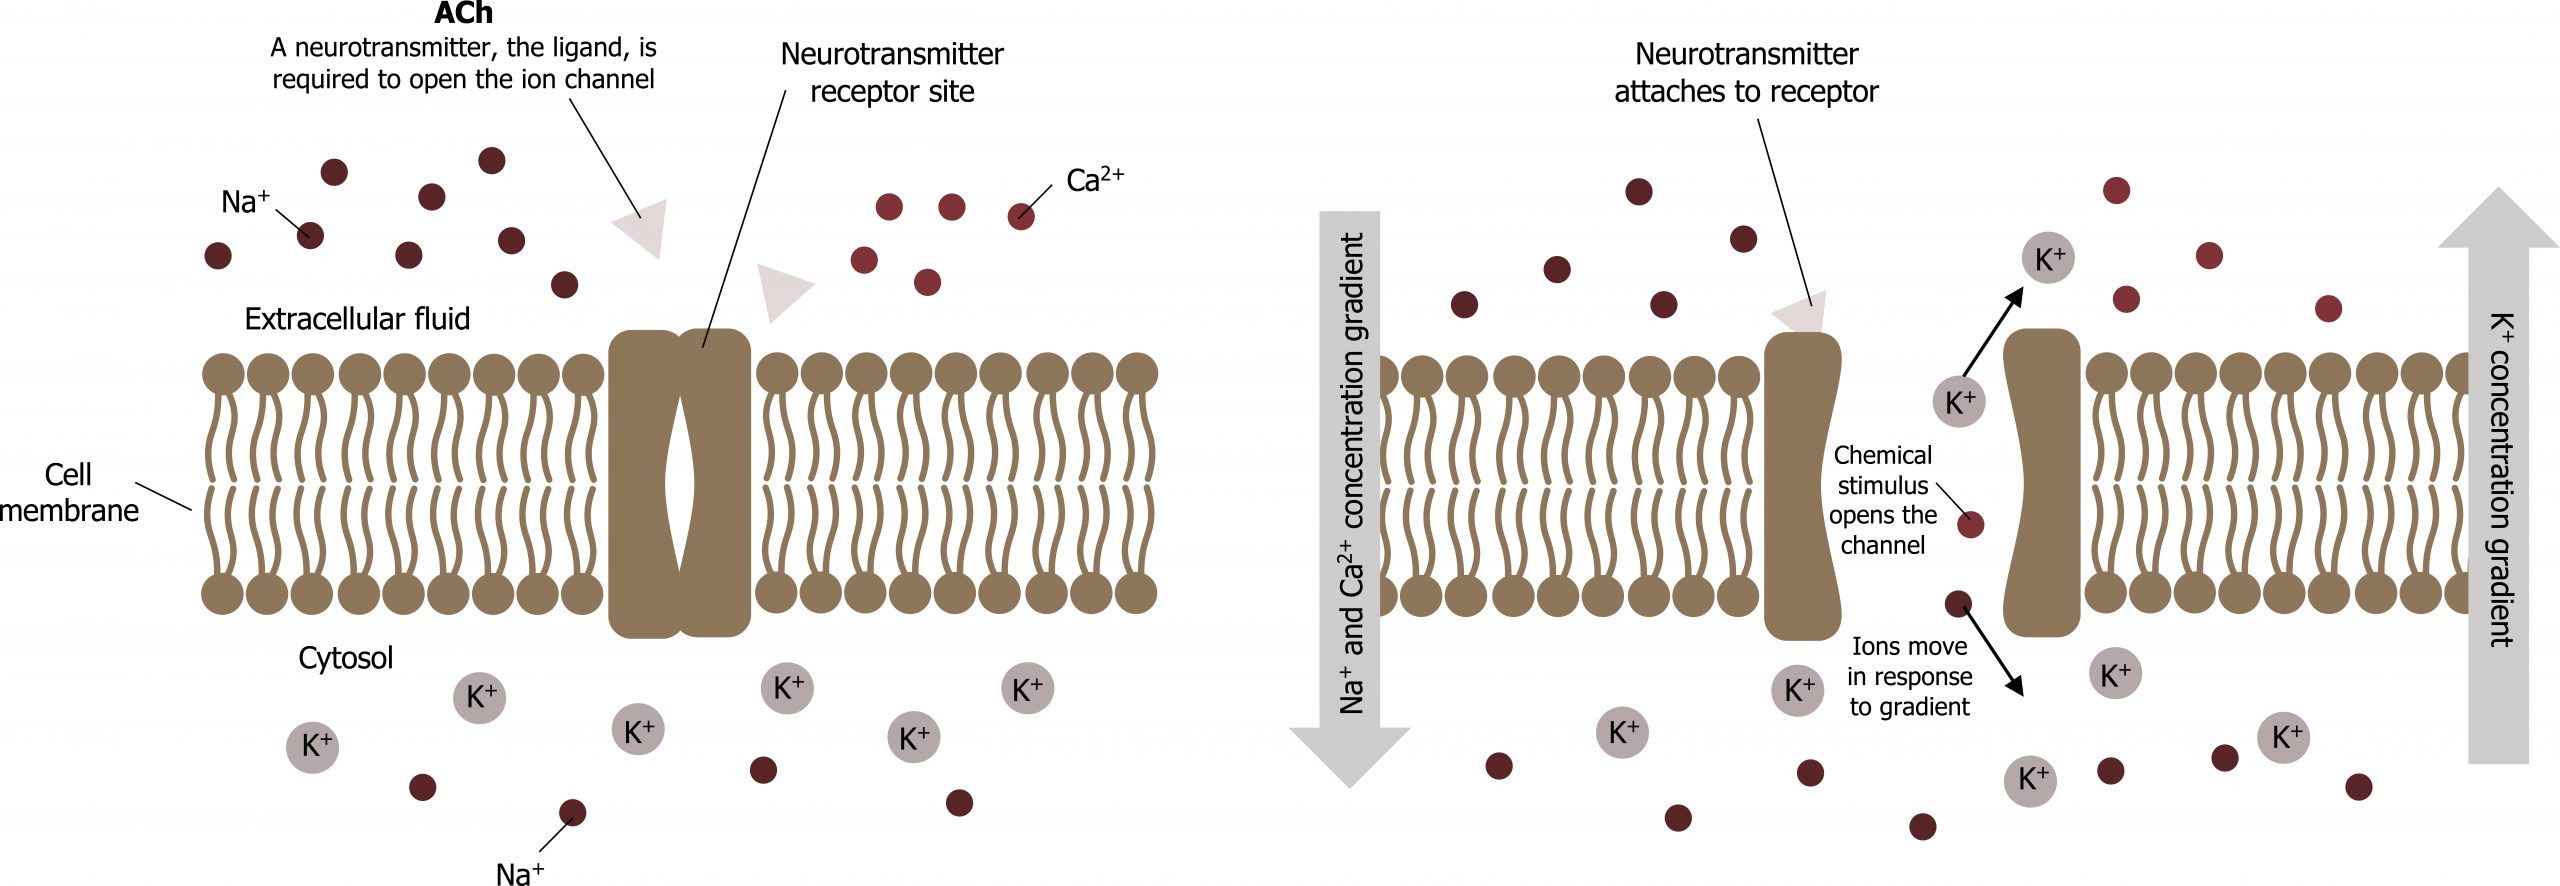 Cell membrane dividing extracellular fluid (top) that contains Na+, ACh, and Ca2+ and the cytosol (bottom) that contains K+ and Na+. Transmembrane neurotransmitter receptor site. ACh: A neurotransmitter, the ligand, is required to open the ion channel. When the neurotransmitter attaches to the receptor the chemical stimulus opens the channel and ions move in response to gradient. Na+ and Ca2+ concentration gradient moves into cytosol. K+ concentration gradient moves into extracellular fluid.